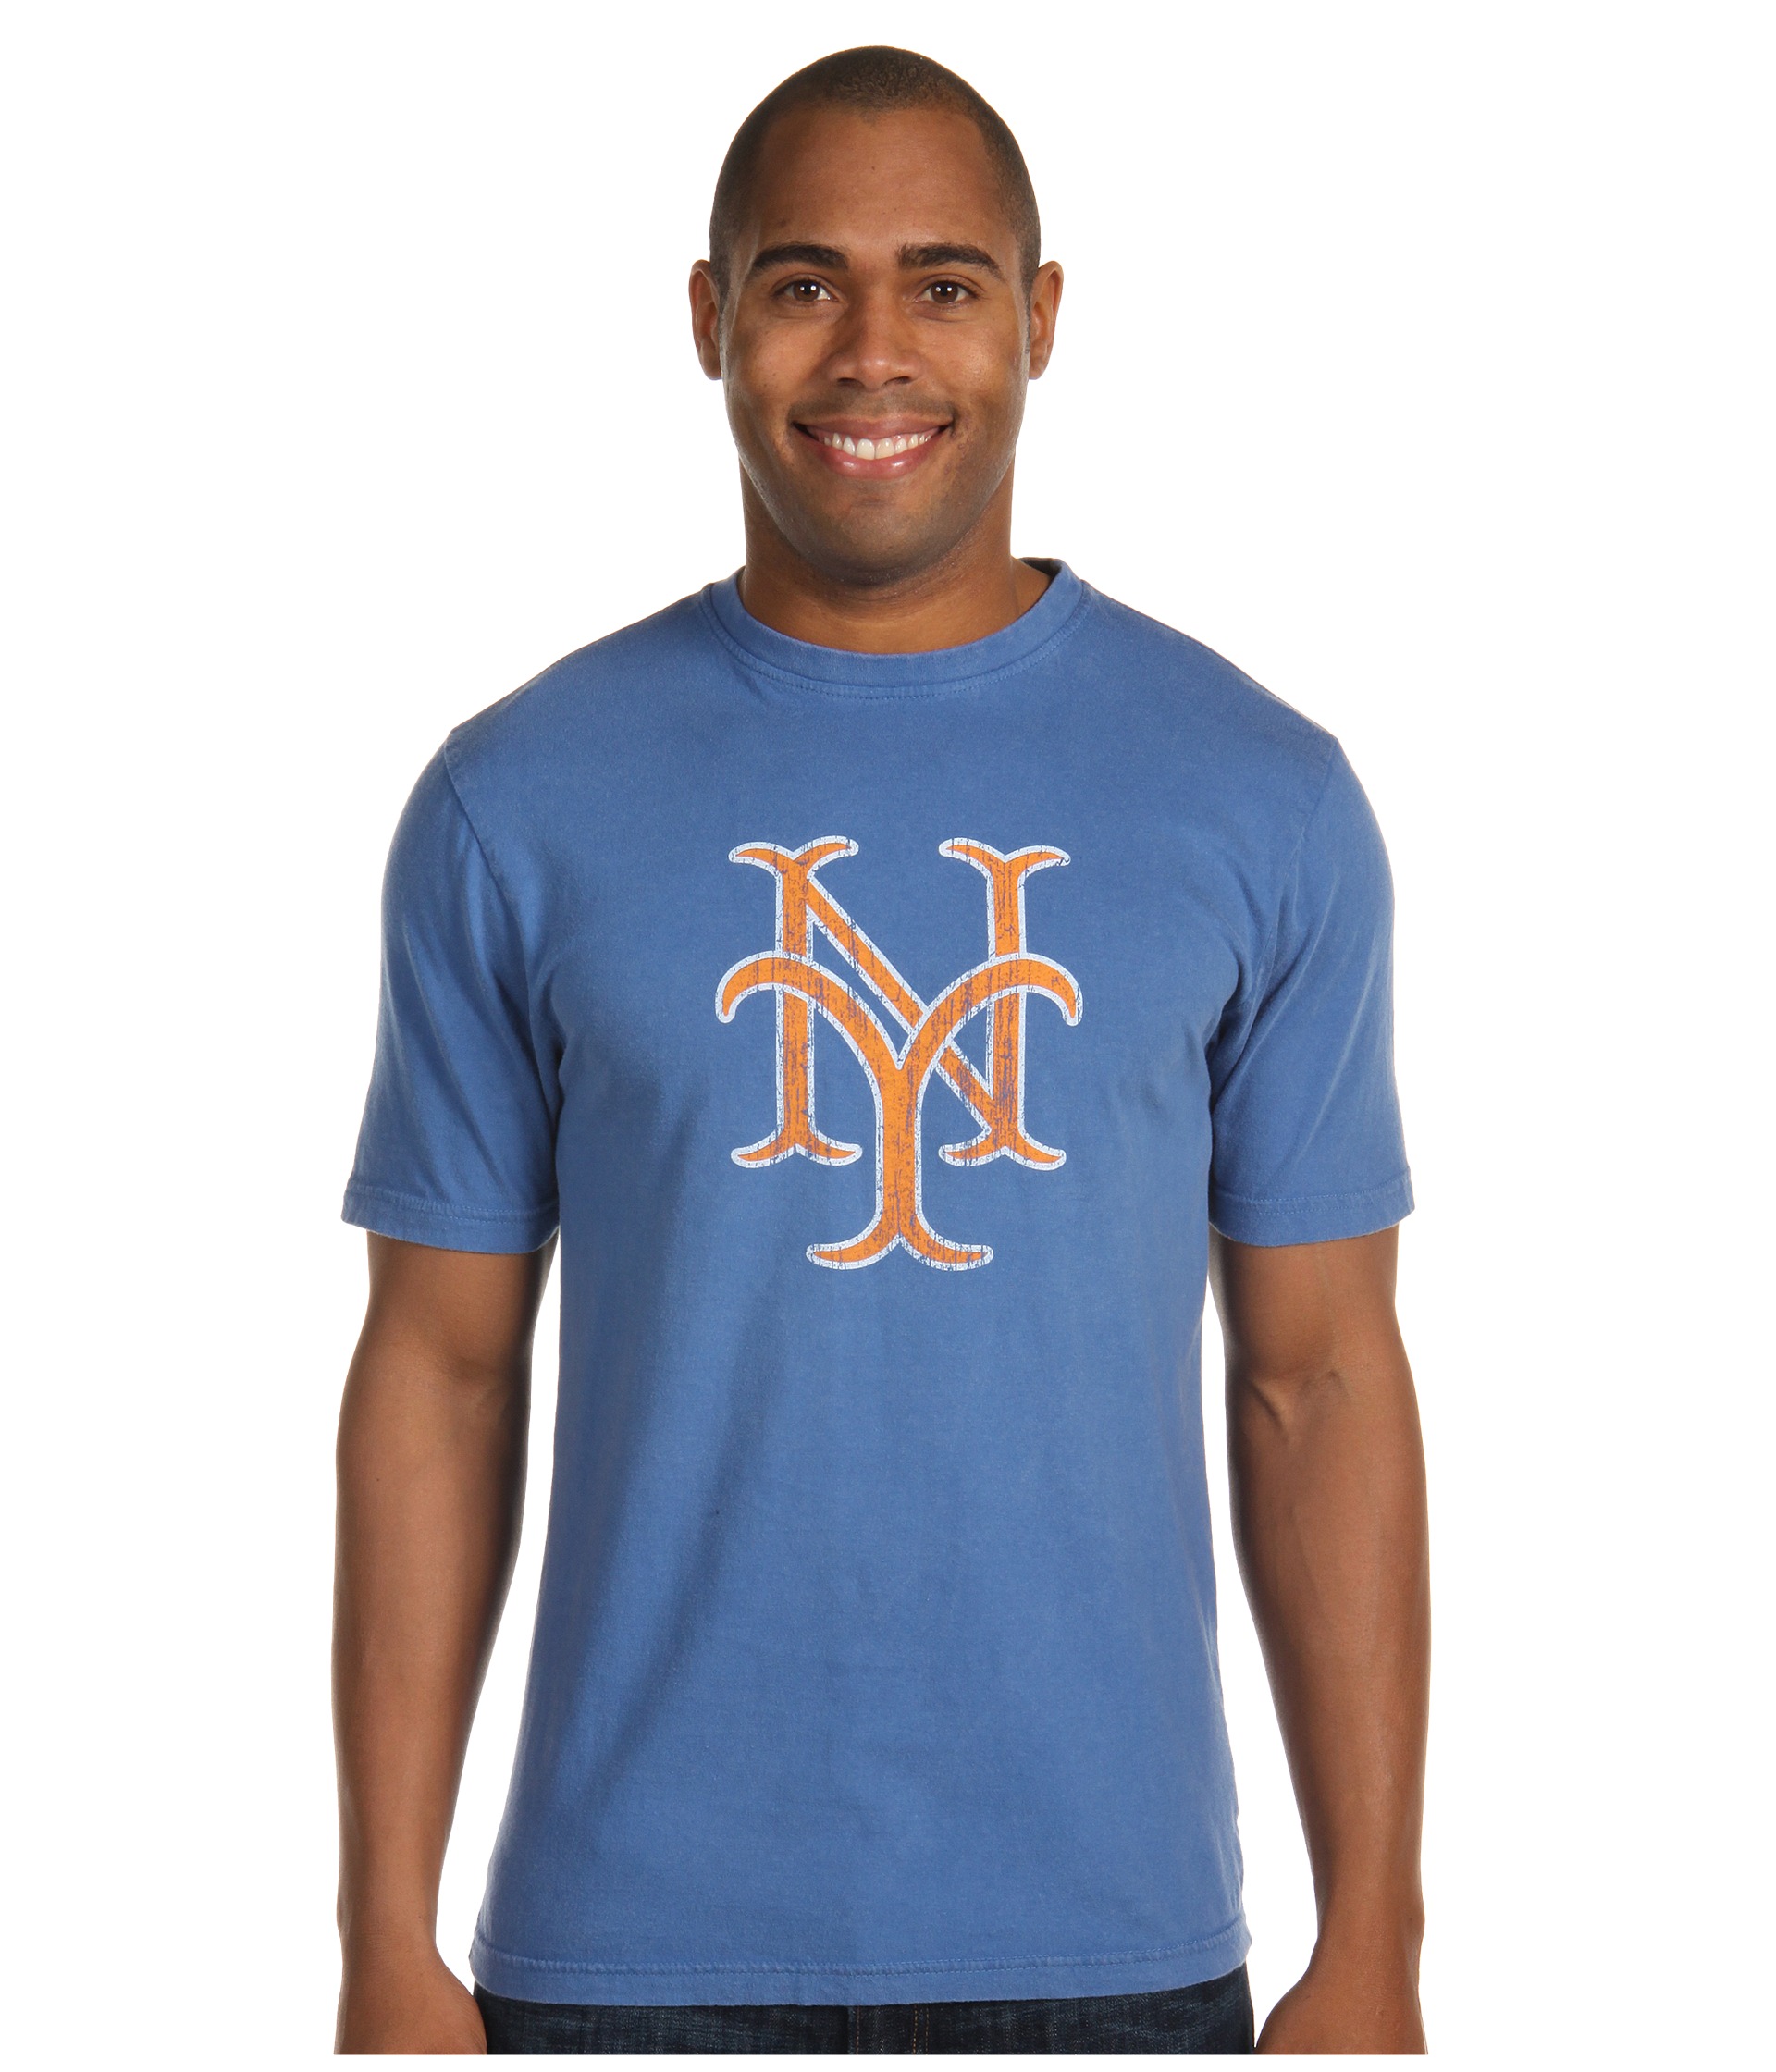 New York Mets Brass Tacks Tee Posted 8/11/10